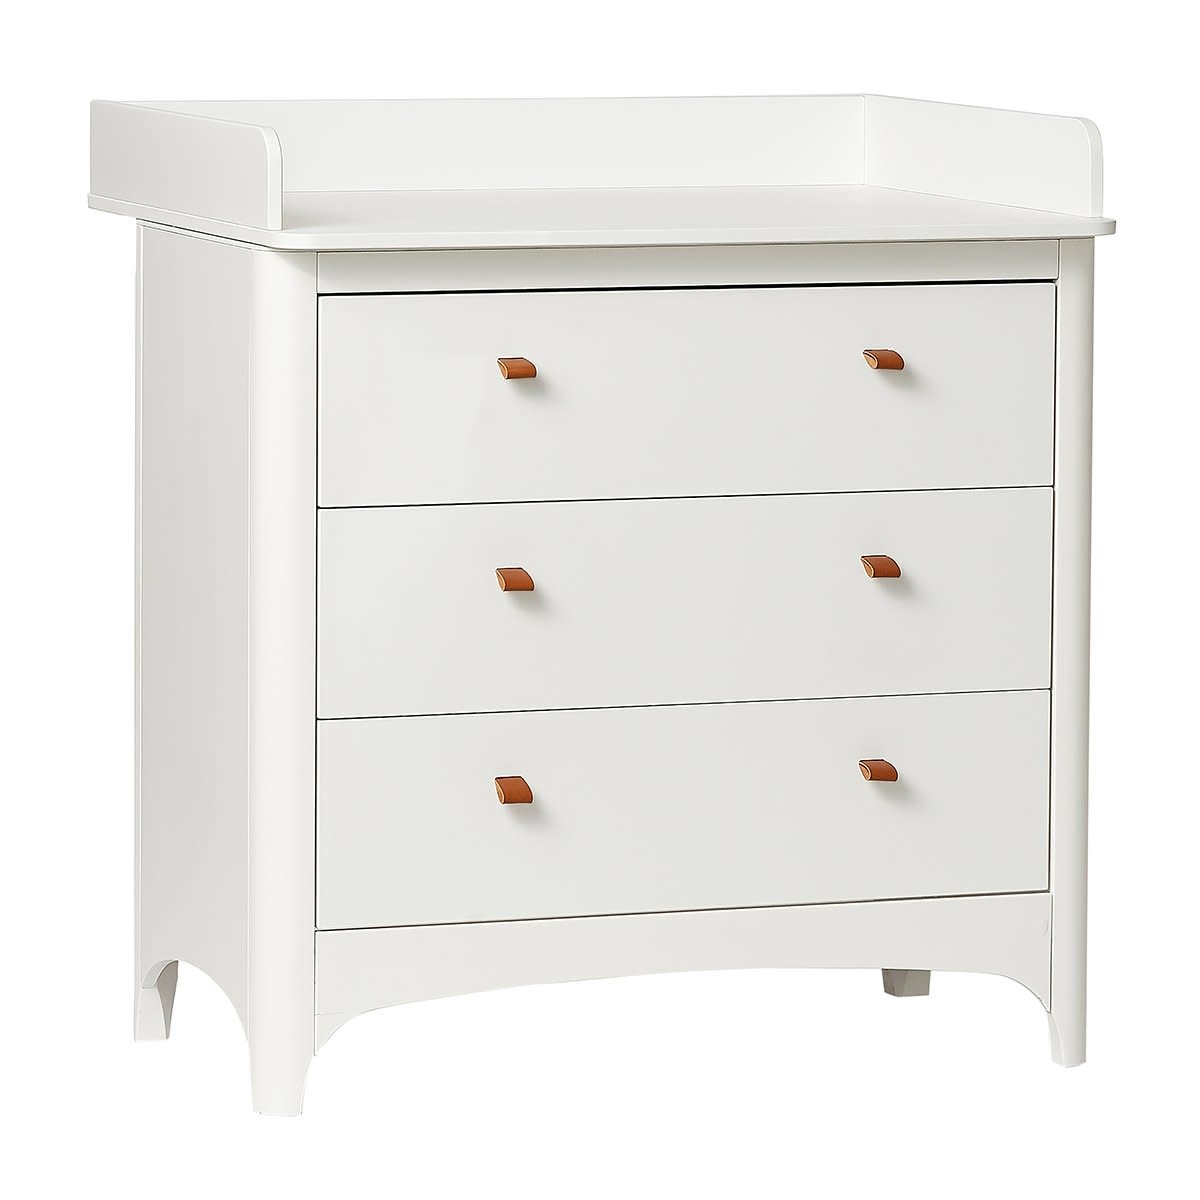 dresser changing table